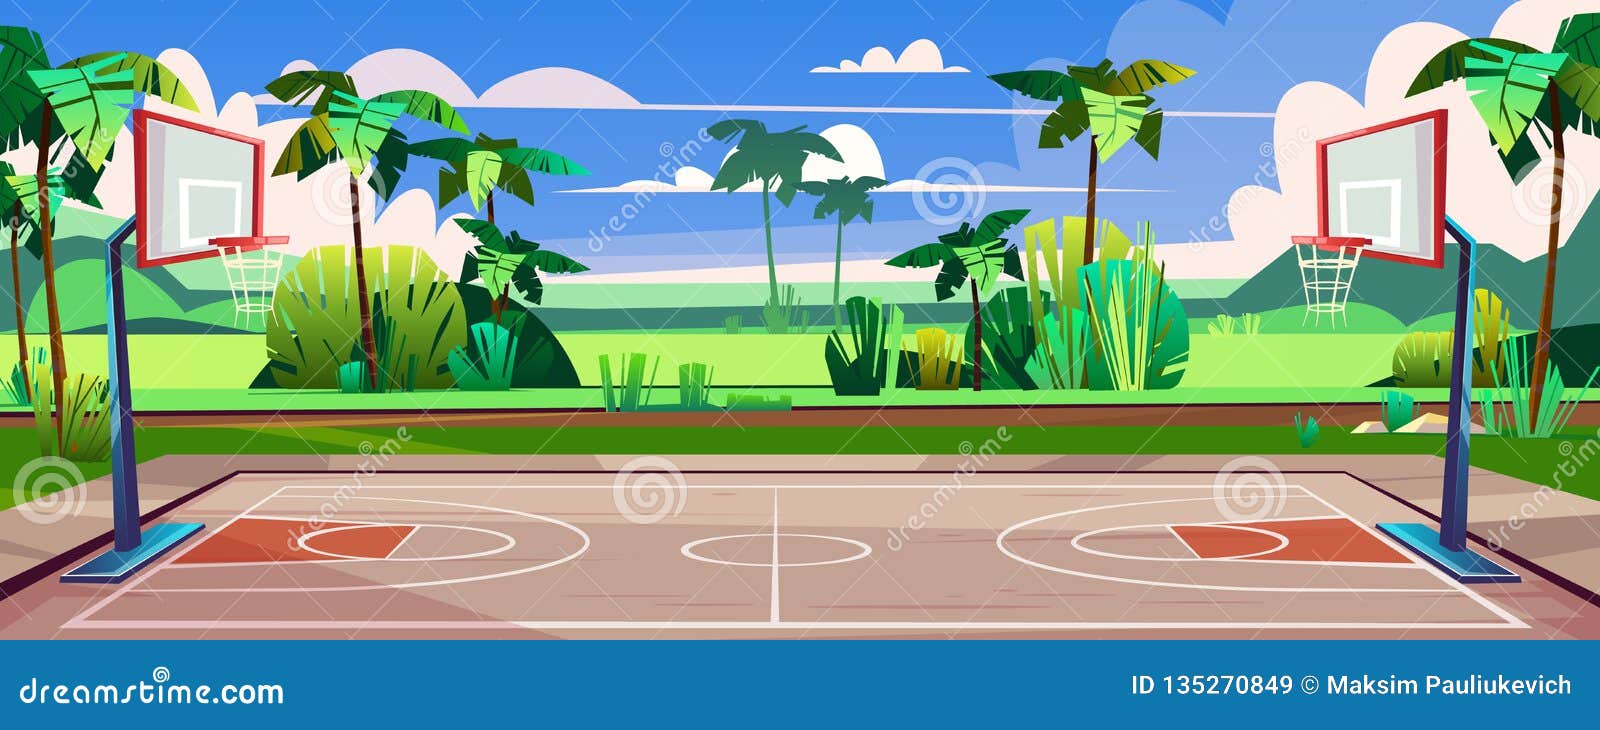 Vector Street Basketball Court with Green Palms Stock Vector